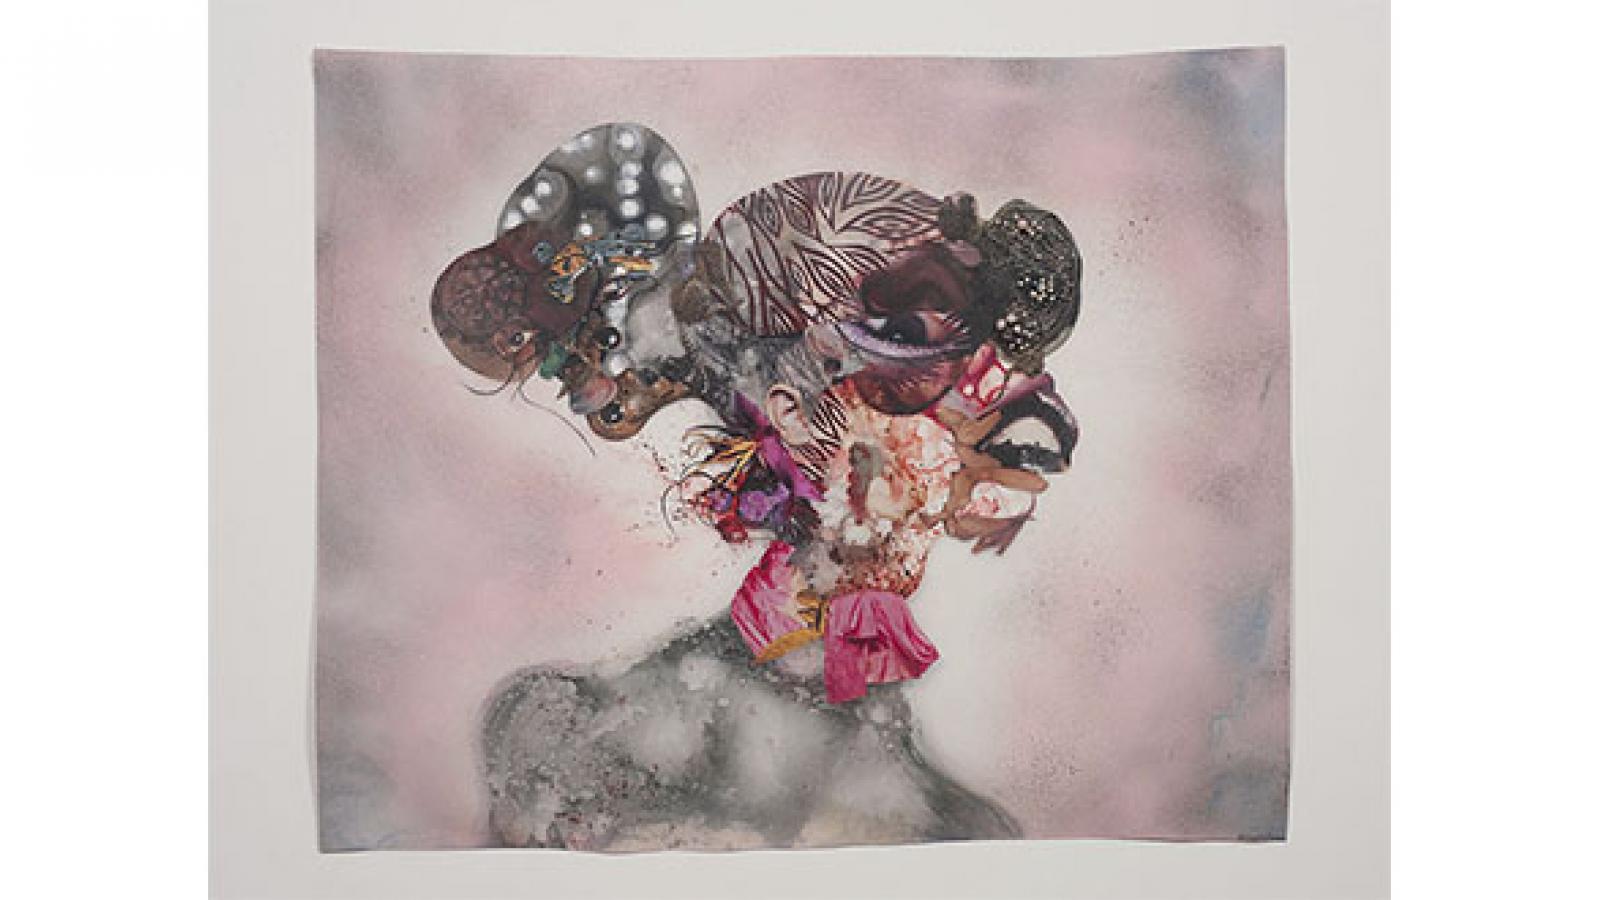 Wangechi Mutu, Pretty Double-Headed, 2010, mixed media,  ink, collage, and spray paint on Mylar, 34 x 42 3/4 inches (86.4 x 106.1 cm) Collection of Blake Byrne. Image Courtesy of Susanne Vielmetter Los Angeles Projects; photo by Robert Wedemeyer.